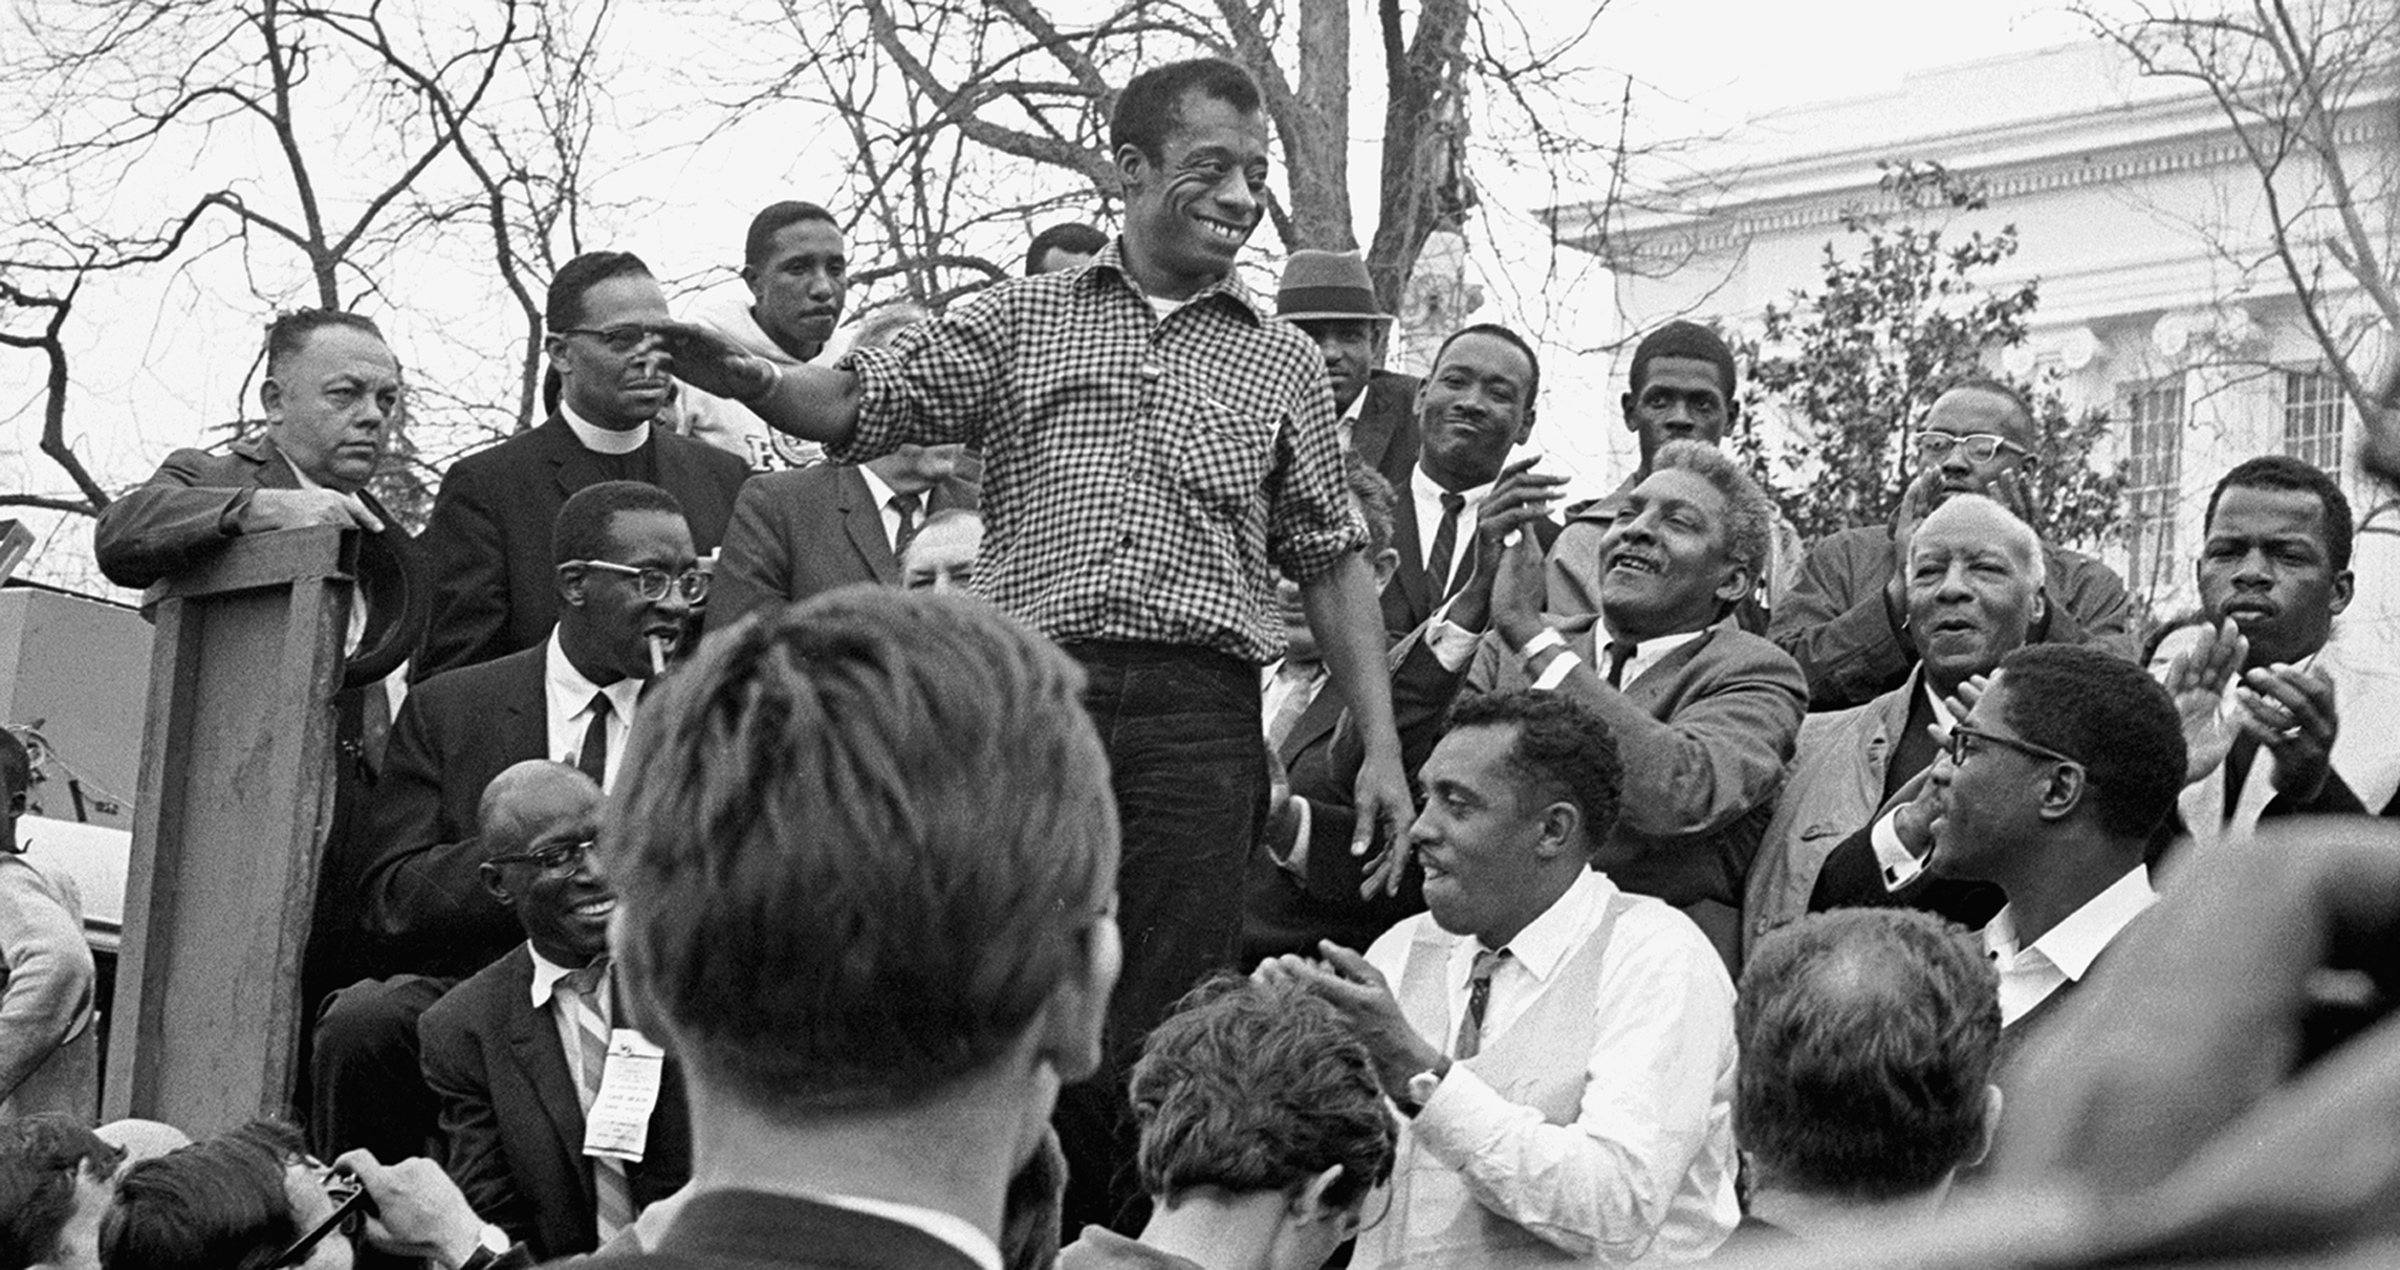 James Baldwin smiles while addressing a crowd participating in the march from Selma to Montgomery in support of voting rights, Alabama, March 1965.